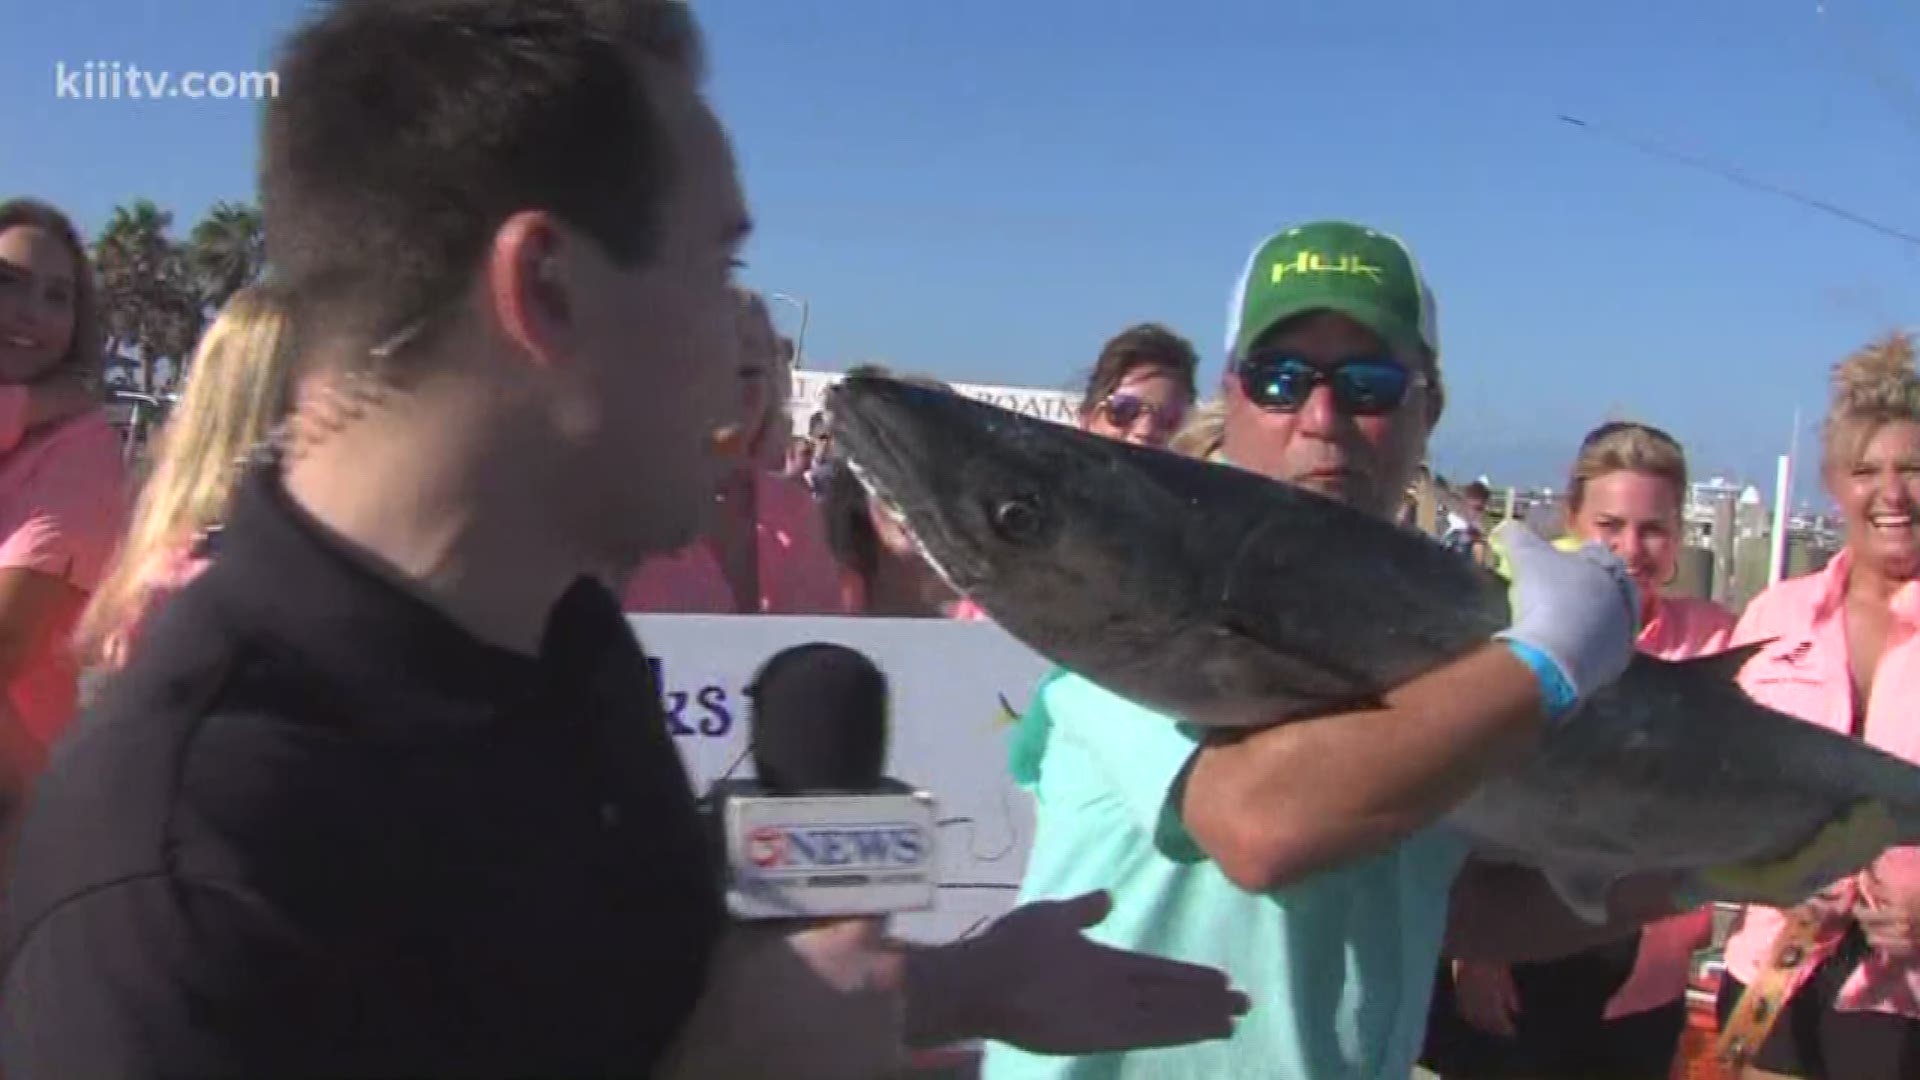 The 83rd annual Deep Sea Roundup in Port Aransas is underway with the fishing tournament recovering nicely from Hurricane Harvey with over 250 more participants than last season.